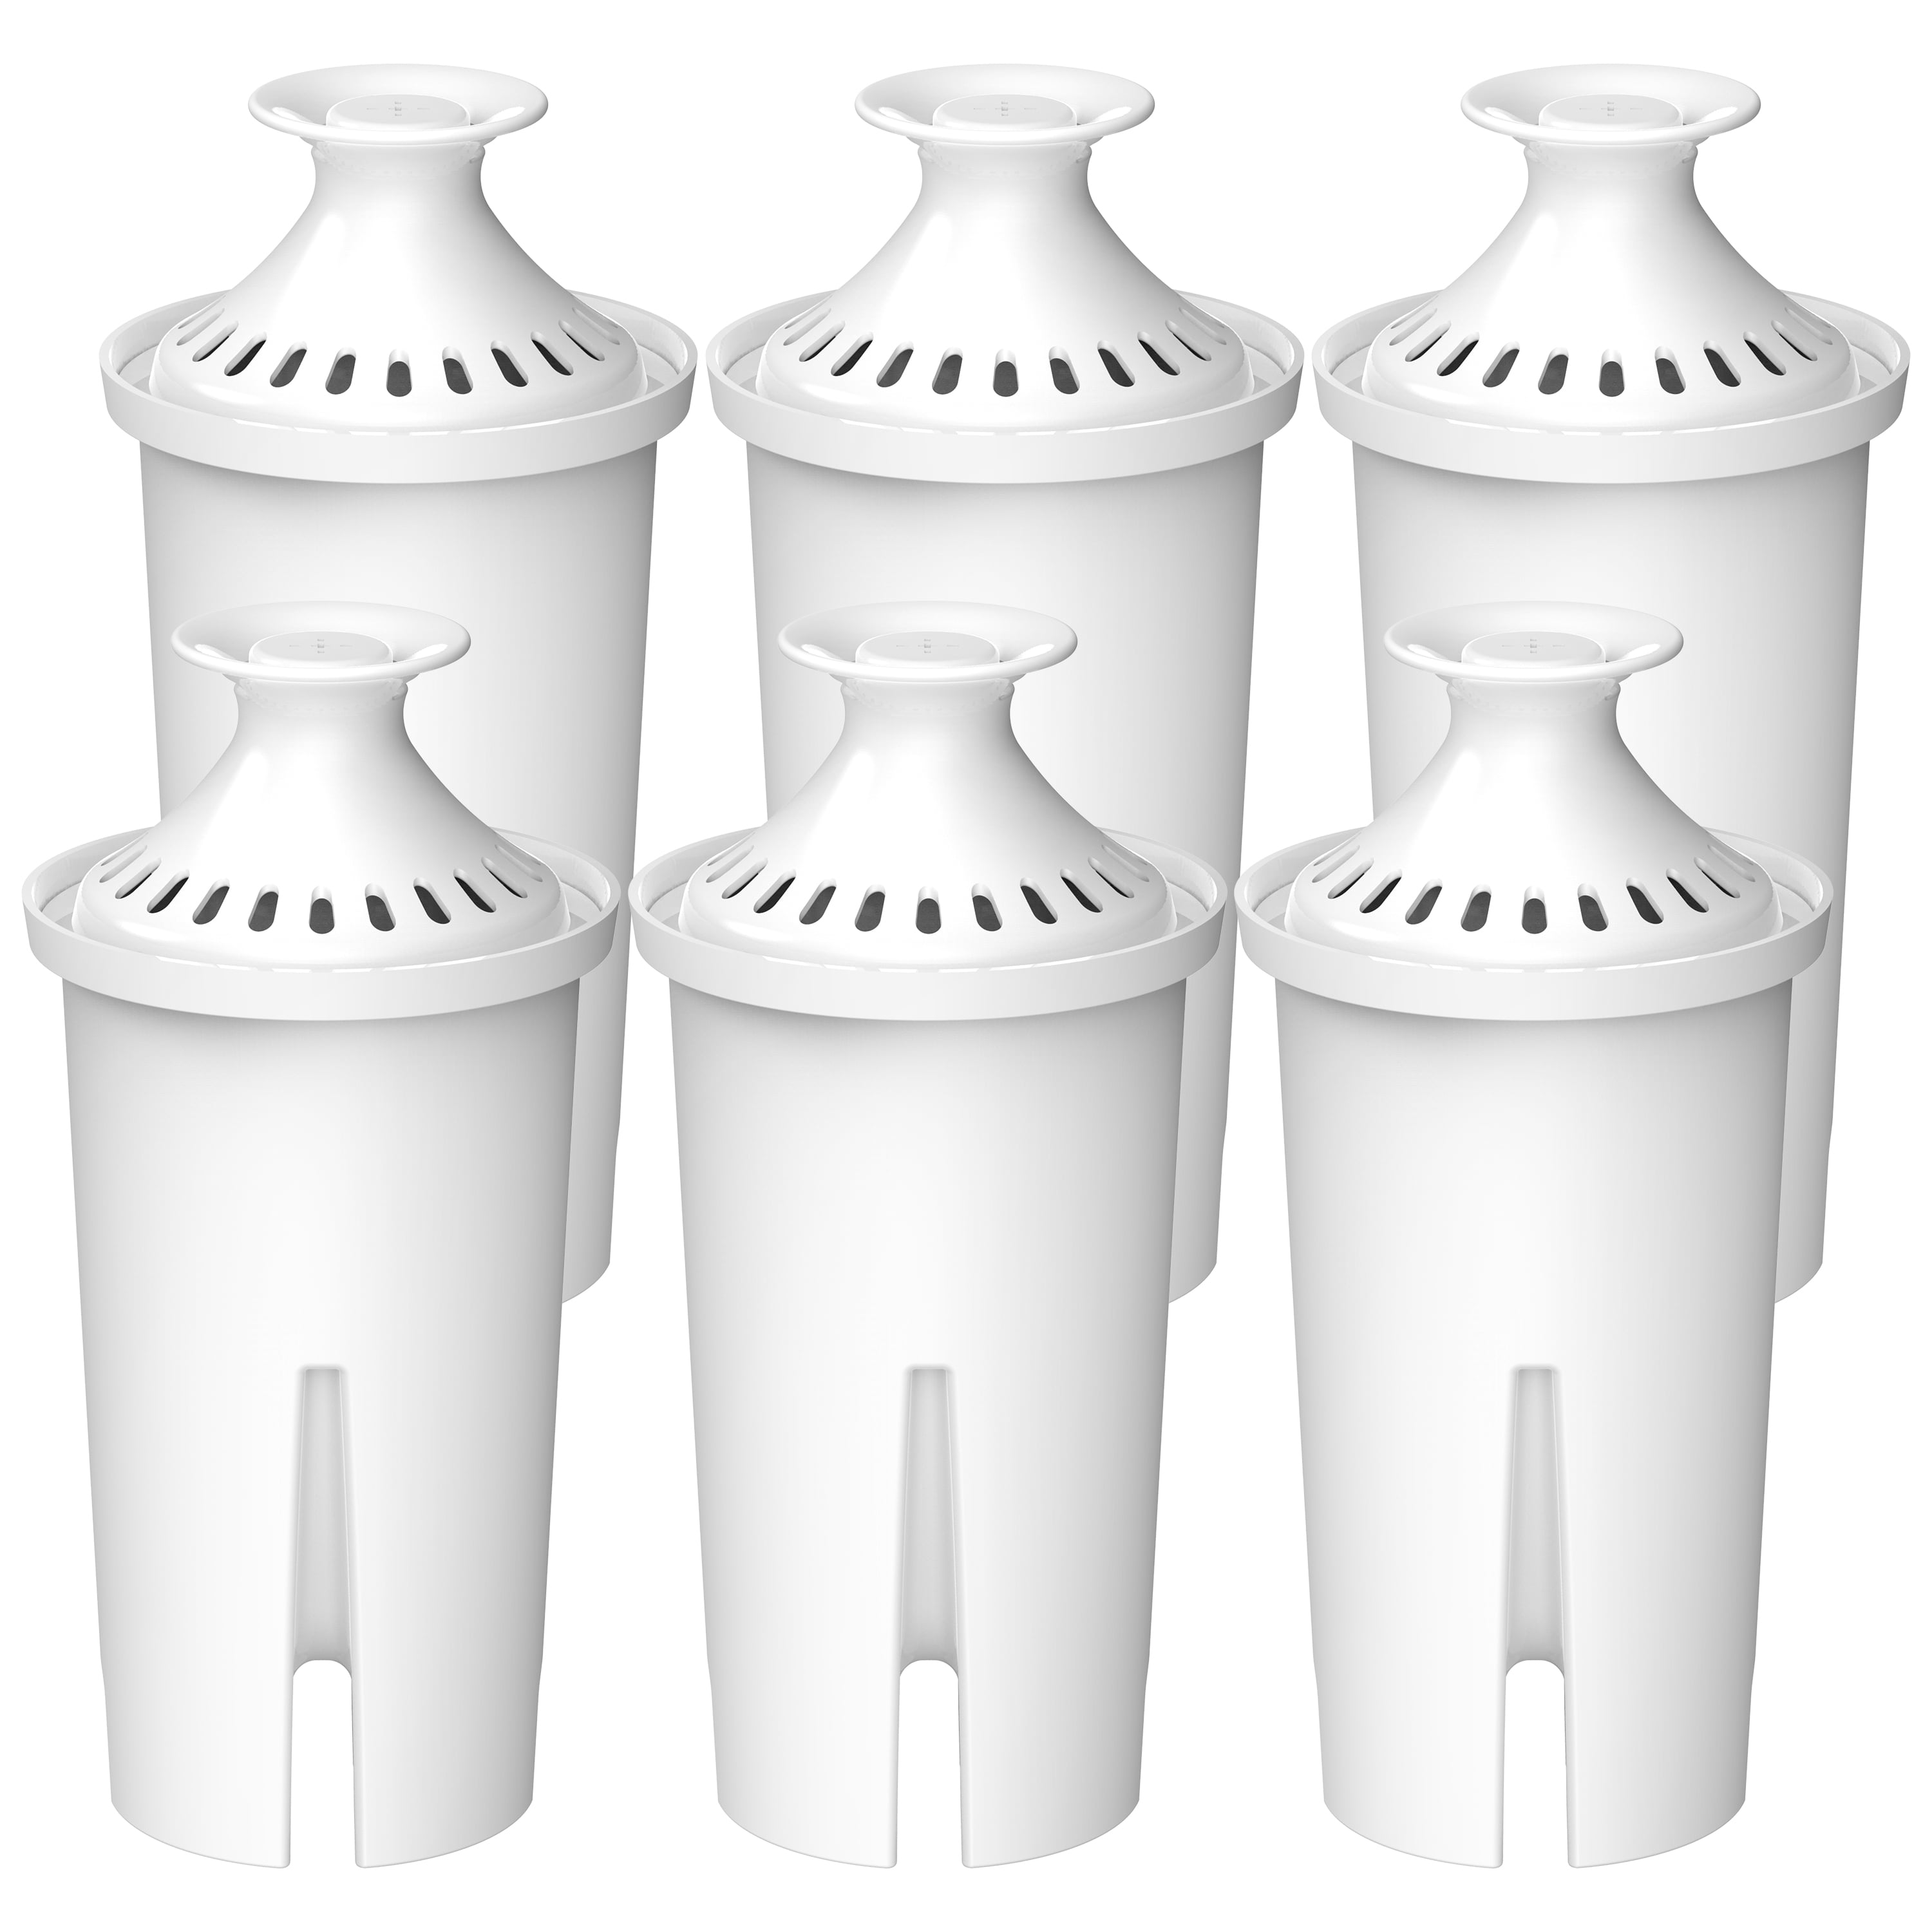 EcoAqua Replacement for Zerowater Pitcher Water Filter ZR-017 2-Pack